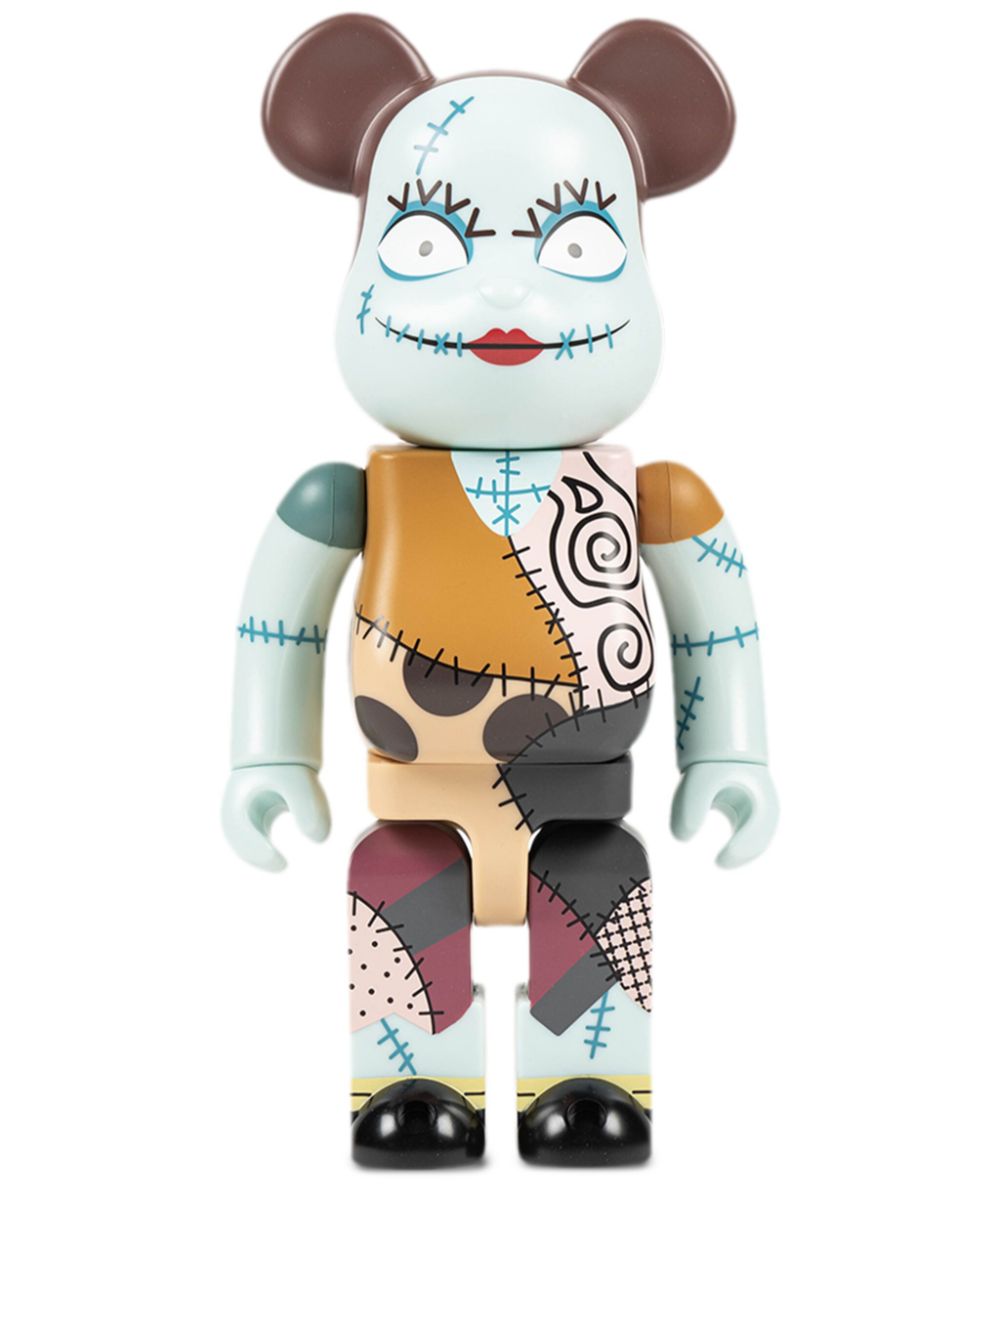 Medicom Toy X The Nightmare Before Christmas Sally Be@rbrick 400% Figure In Blue